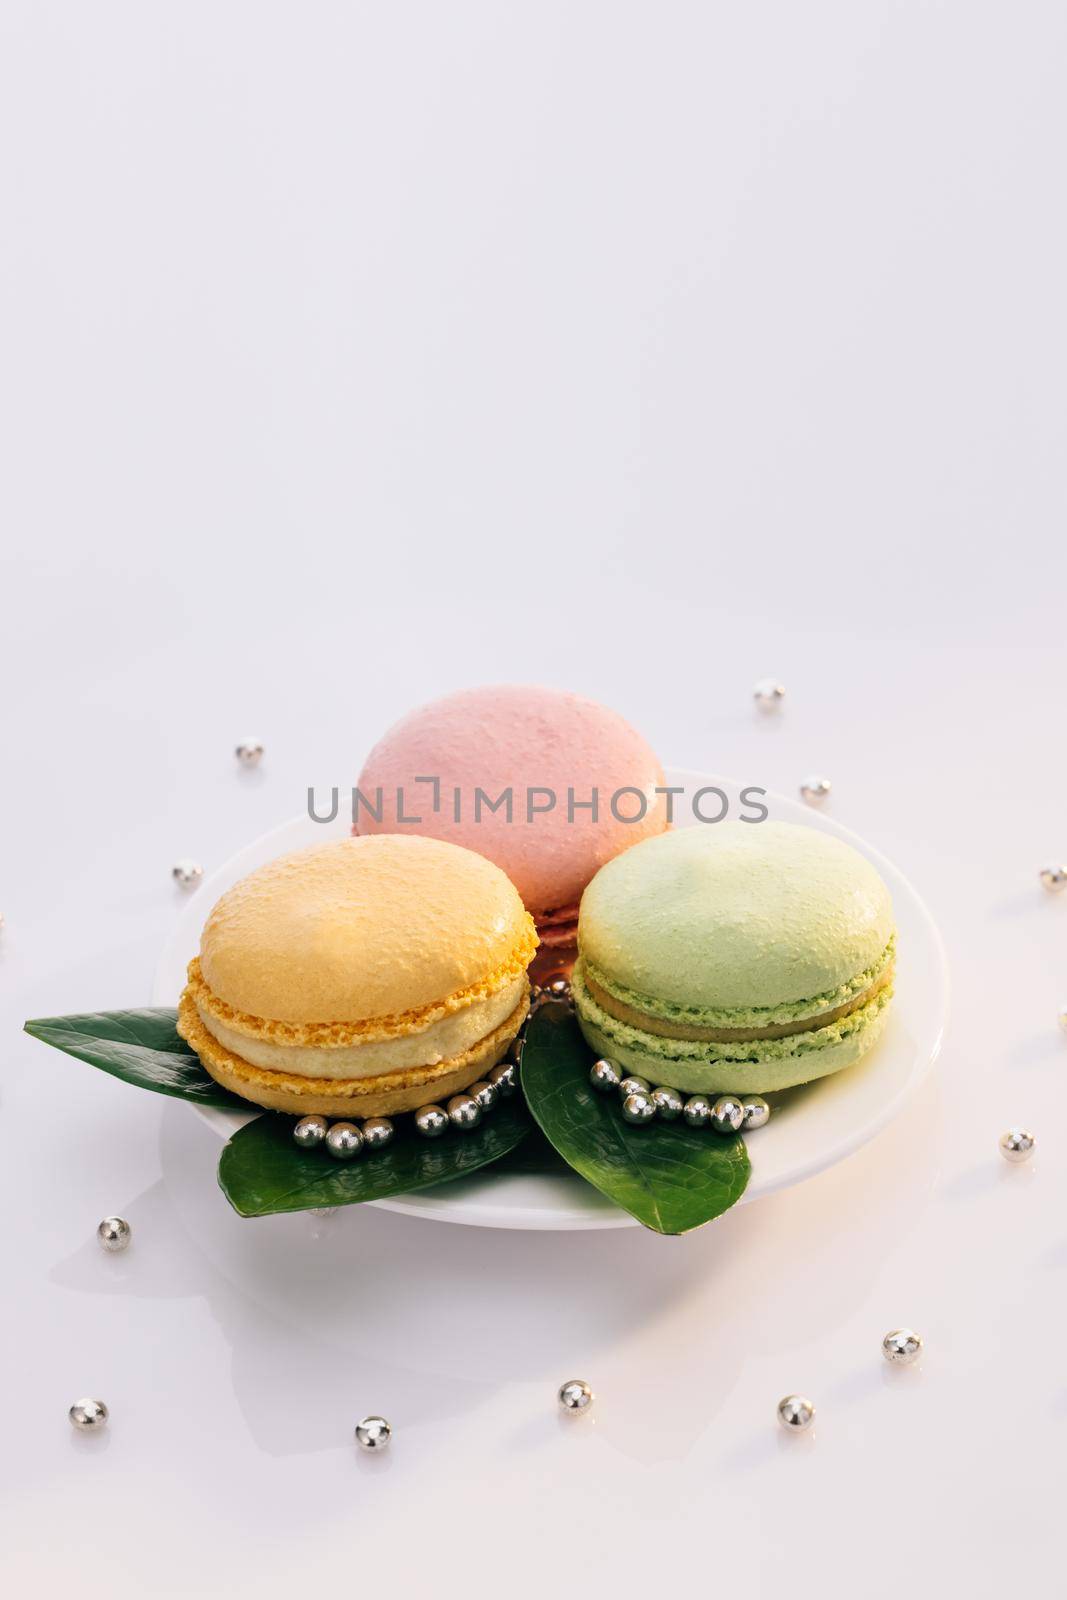 Multicolor macarons , french macaroon, greedy pastry. Macarons on white reflective glass, sweet tasty desserts. French dessert sweets colored macaroons cookies arranged on a while plate.